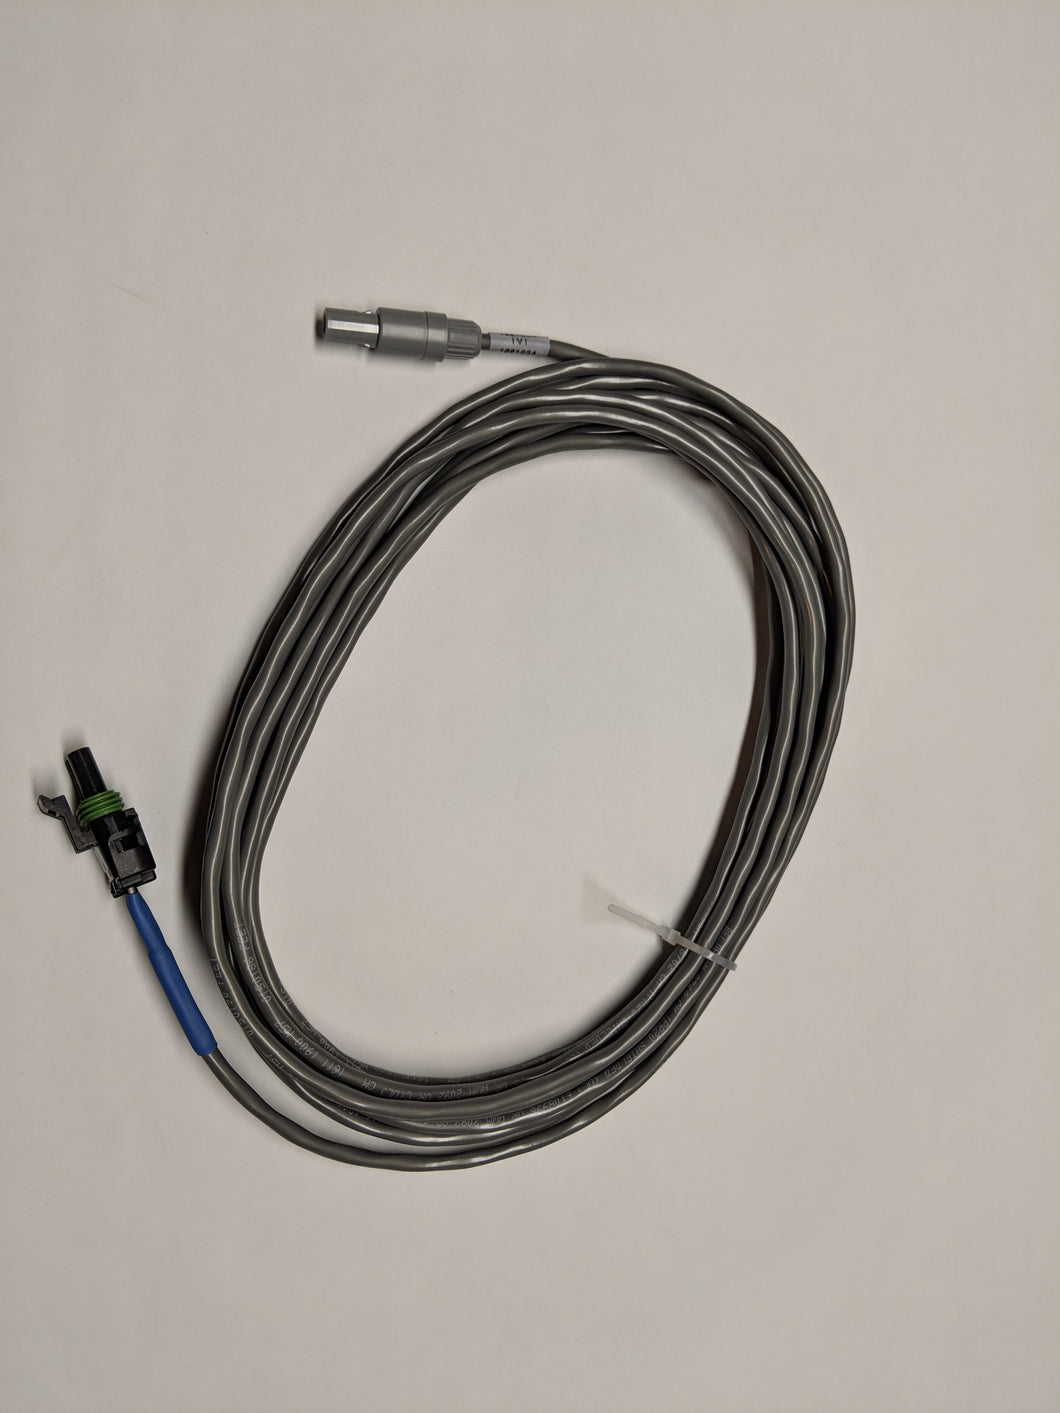 20 ft. speed cable 1001834